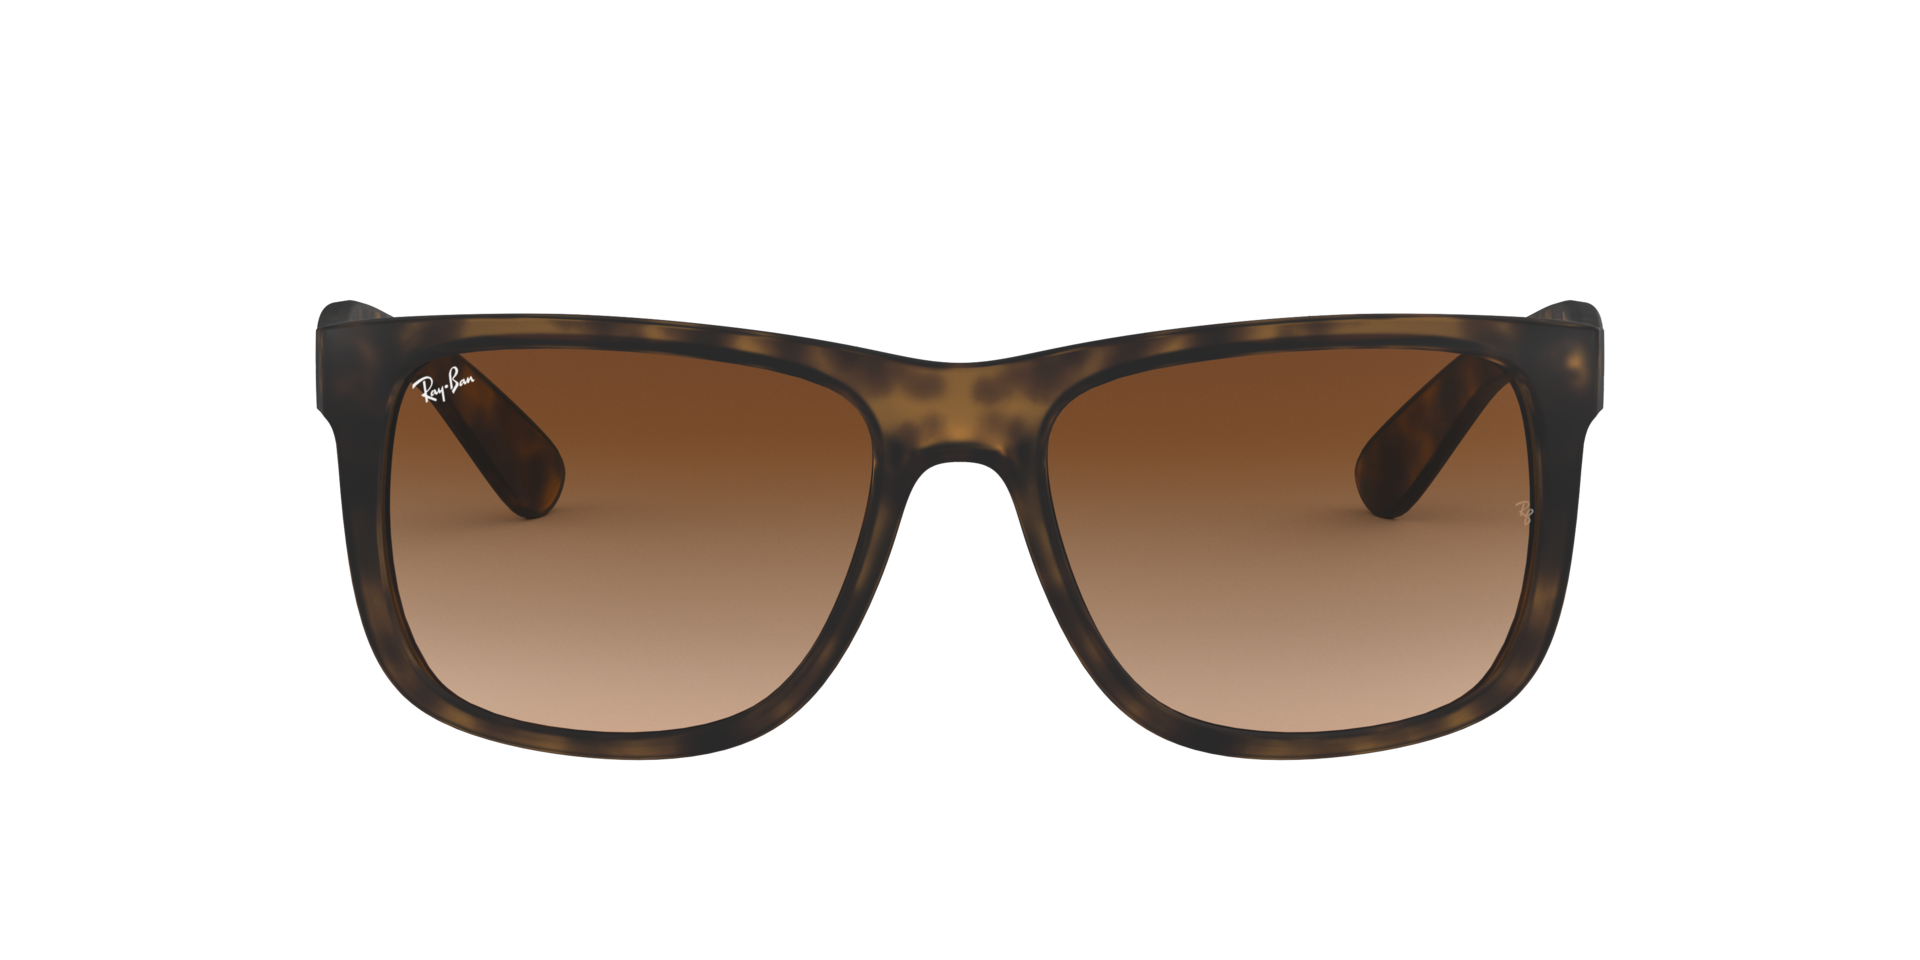 Ray Ban Justin Sonnenbrille RB4165 710/13 51